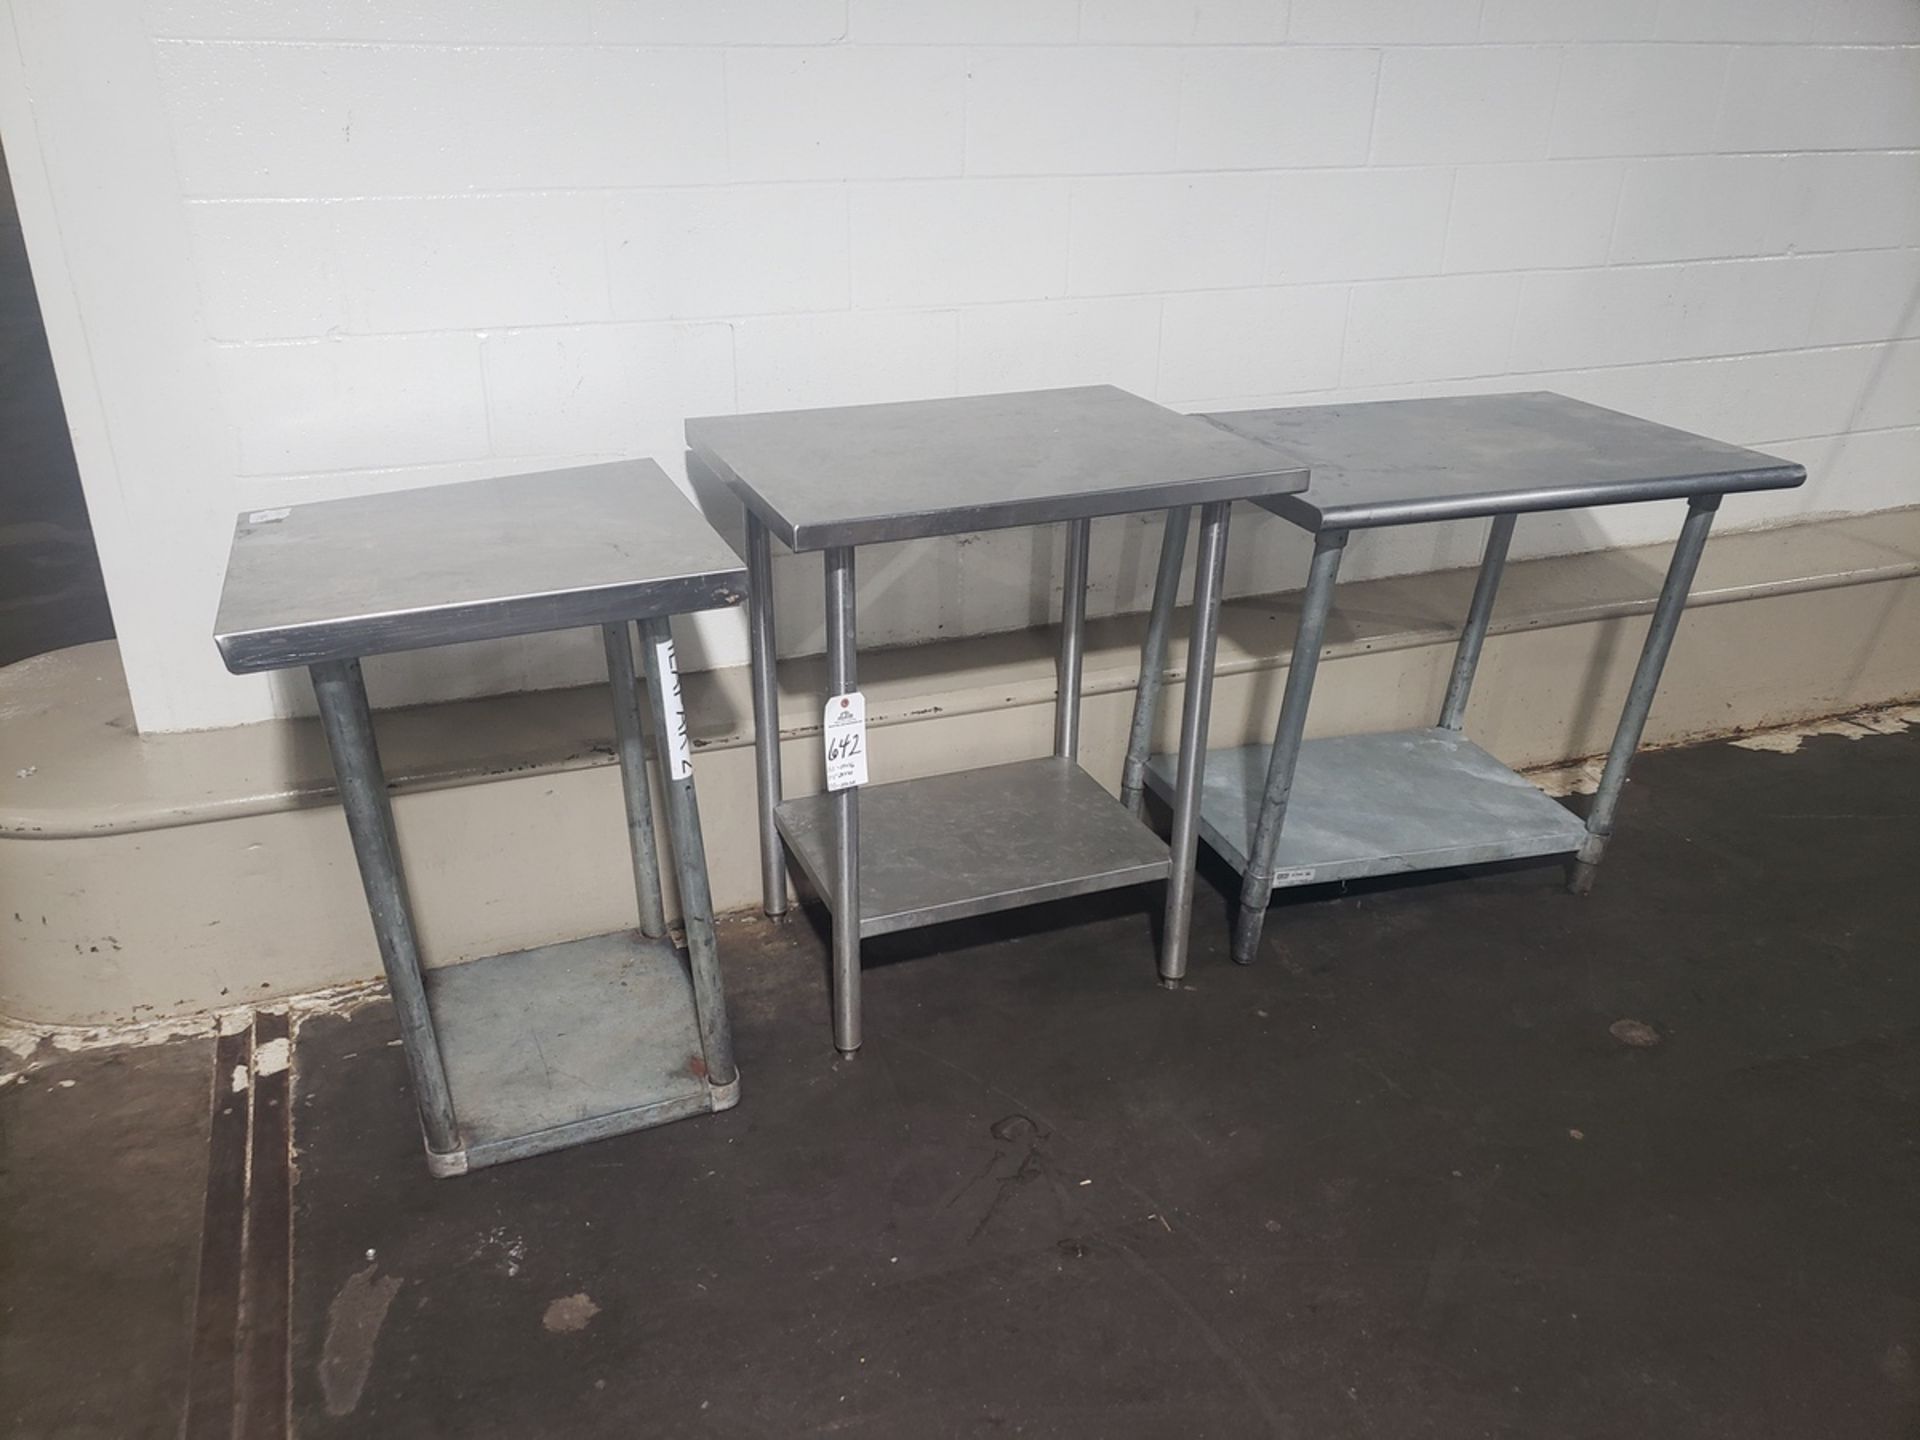 Lot of (3) Stainless Steel Tables, (1) 24" x 36" (1) 24" x 30" (1) 24" x 24"